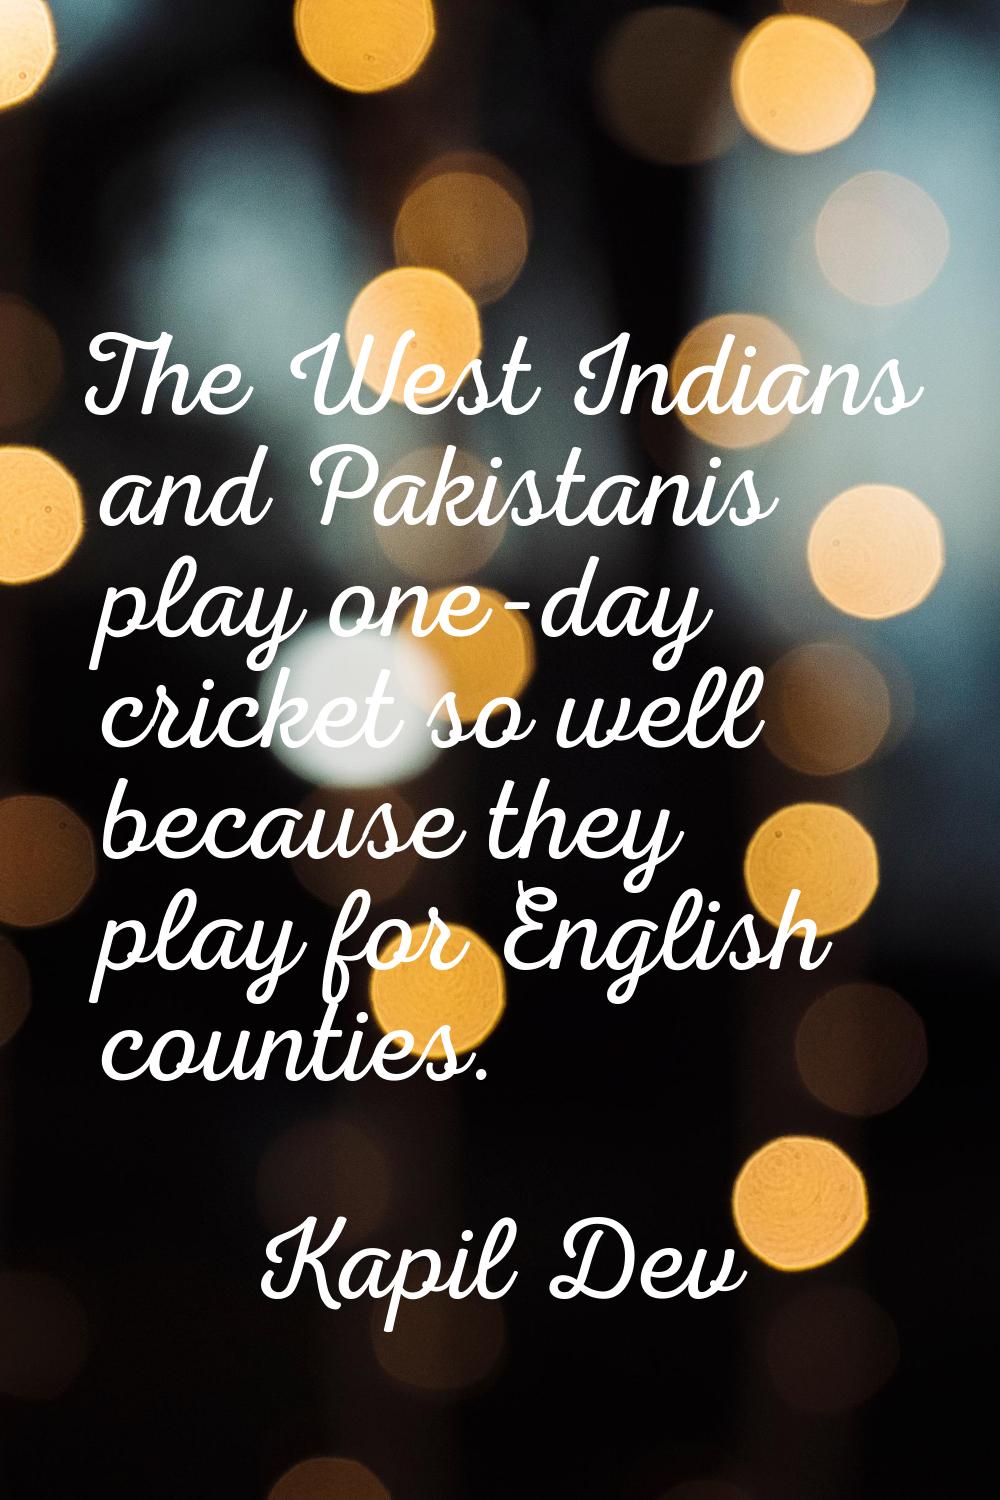 The West Indians and Pakistanis play one-day cricket so well because they play for English counties